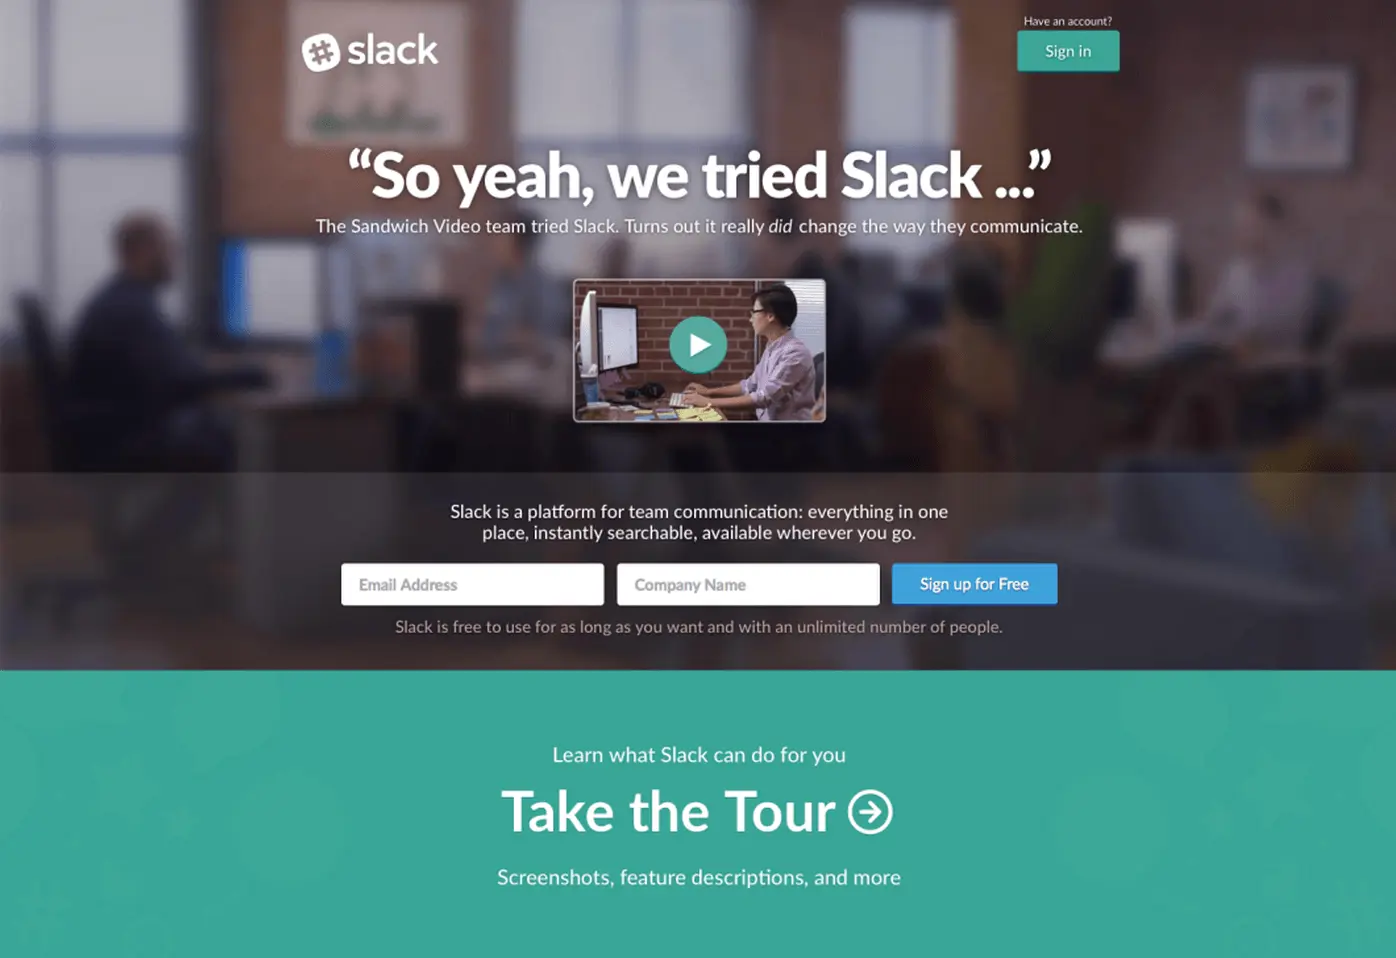 Landing page from Slack